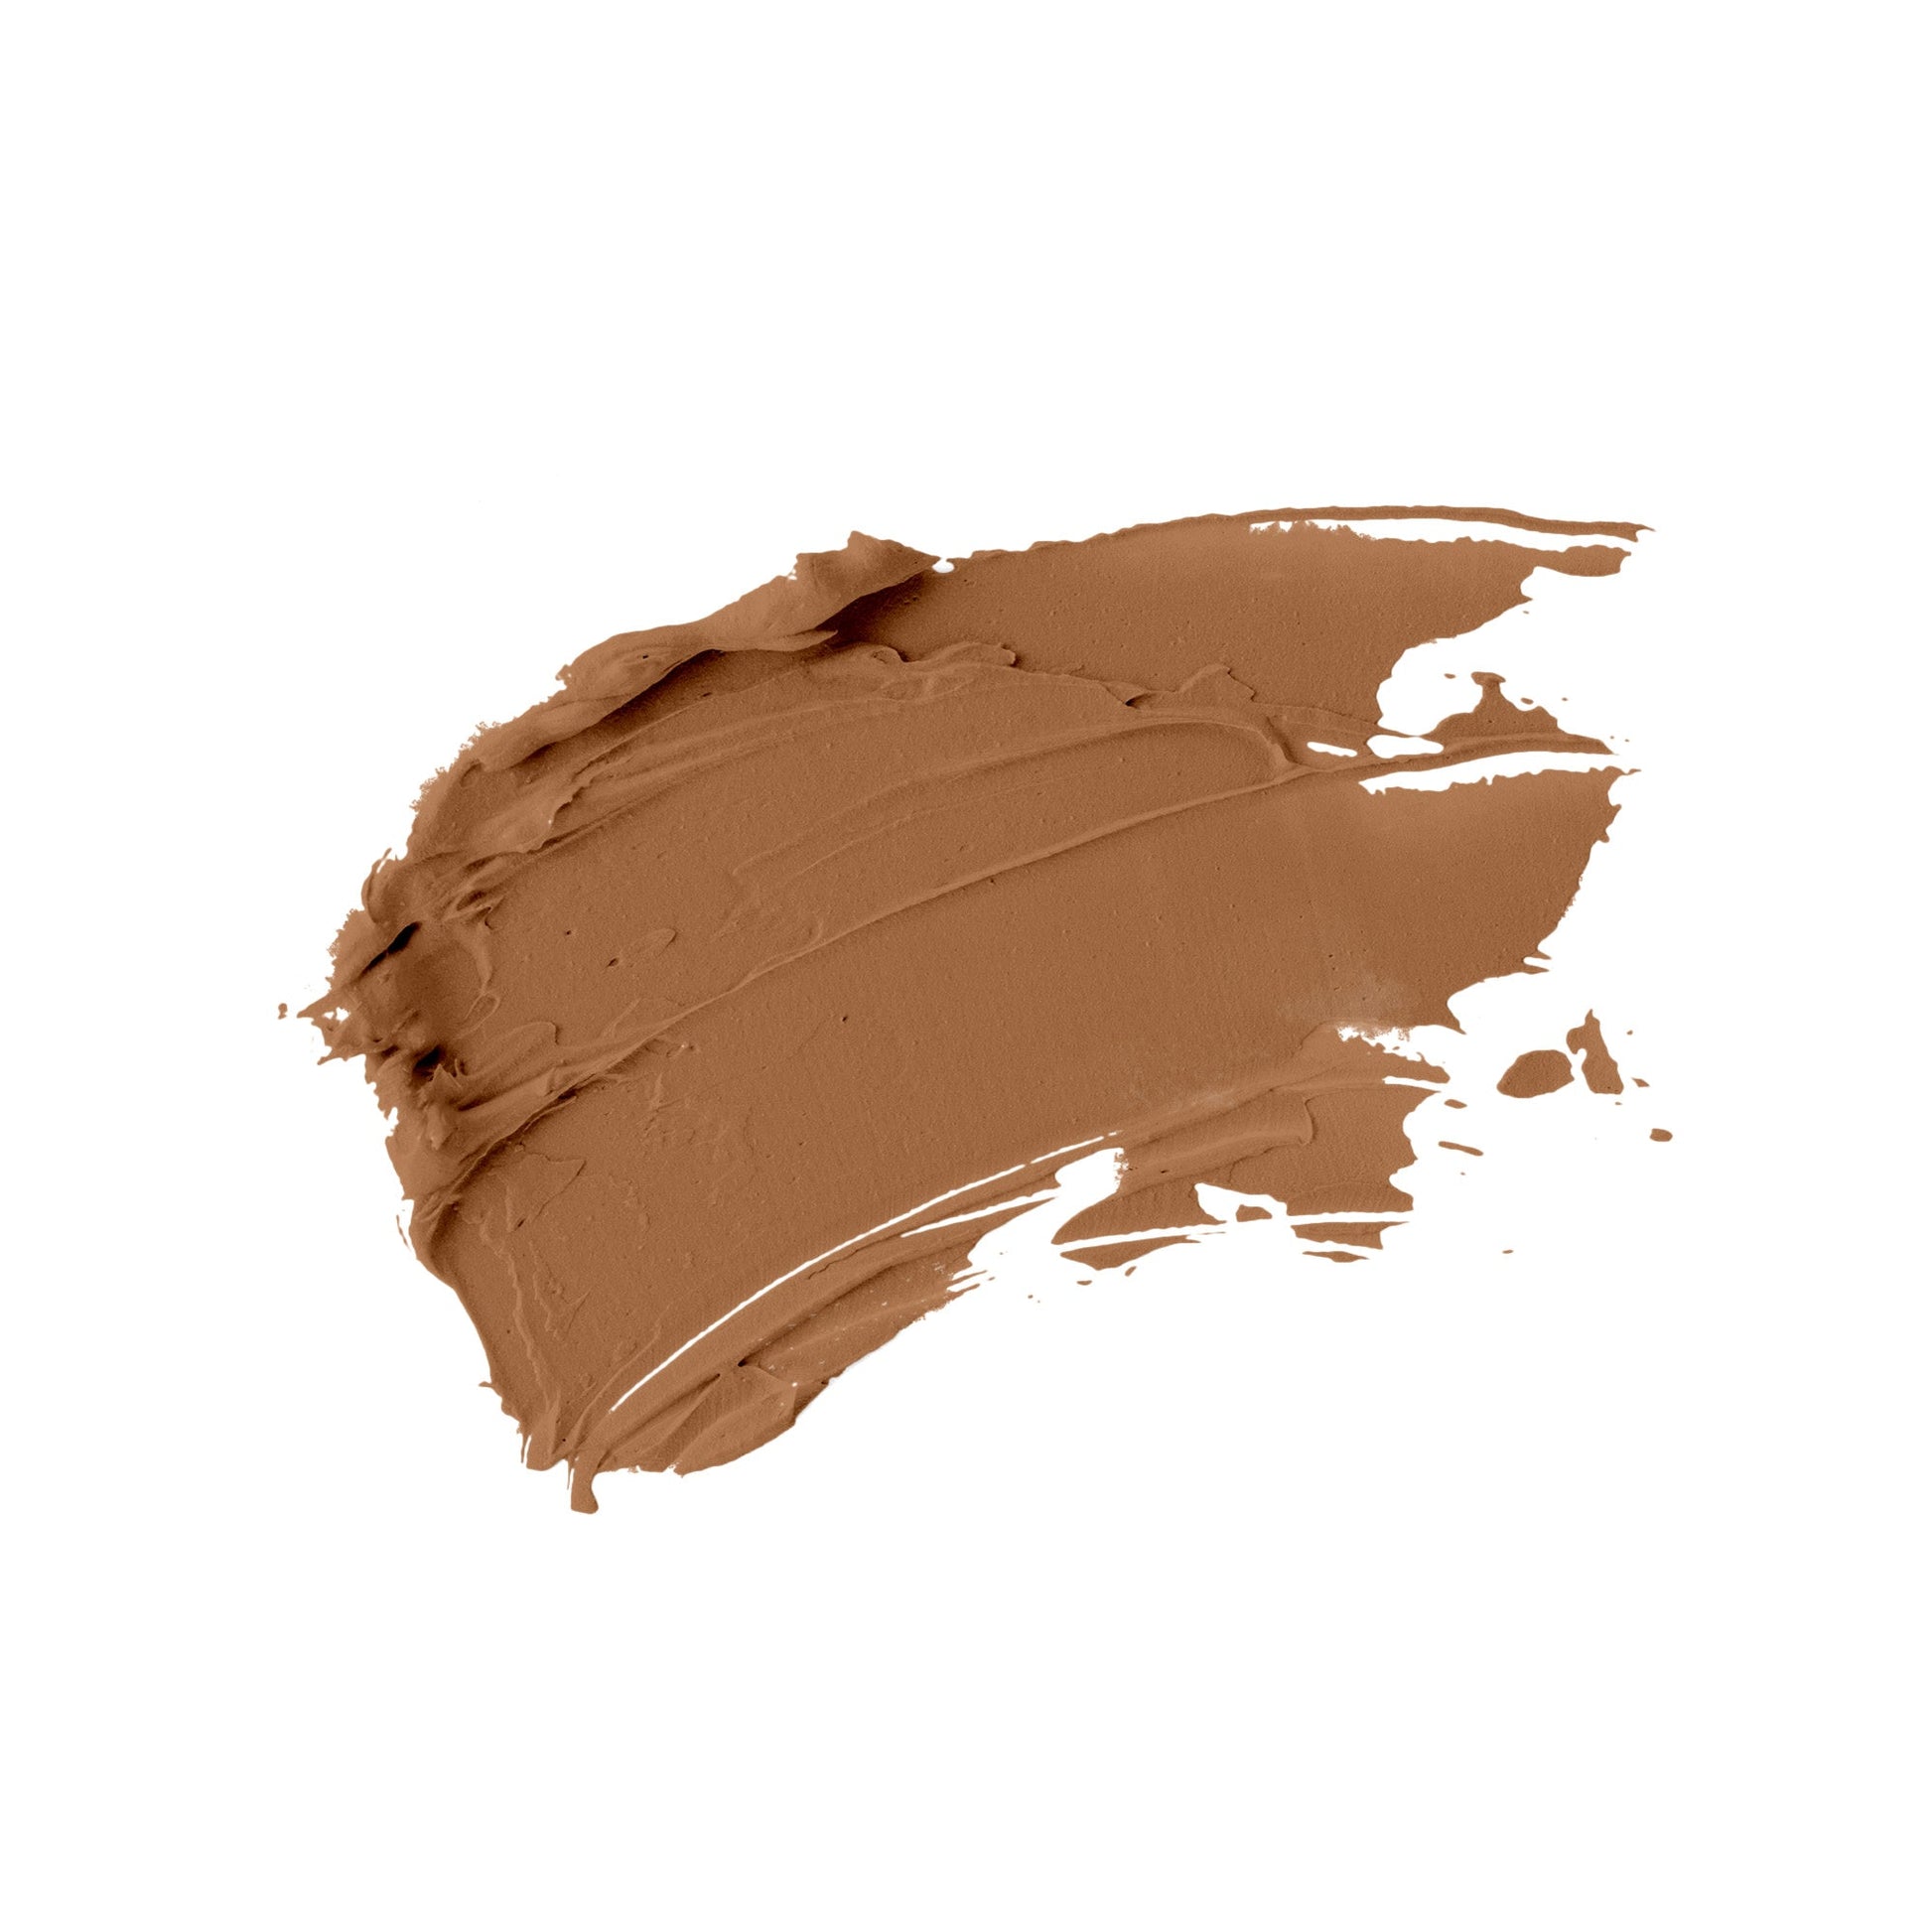 Swatch of caramel tone of an oil free natural non-toxic liquid foundation